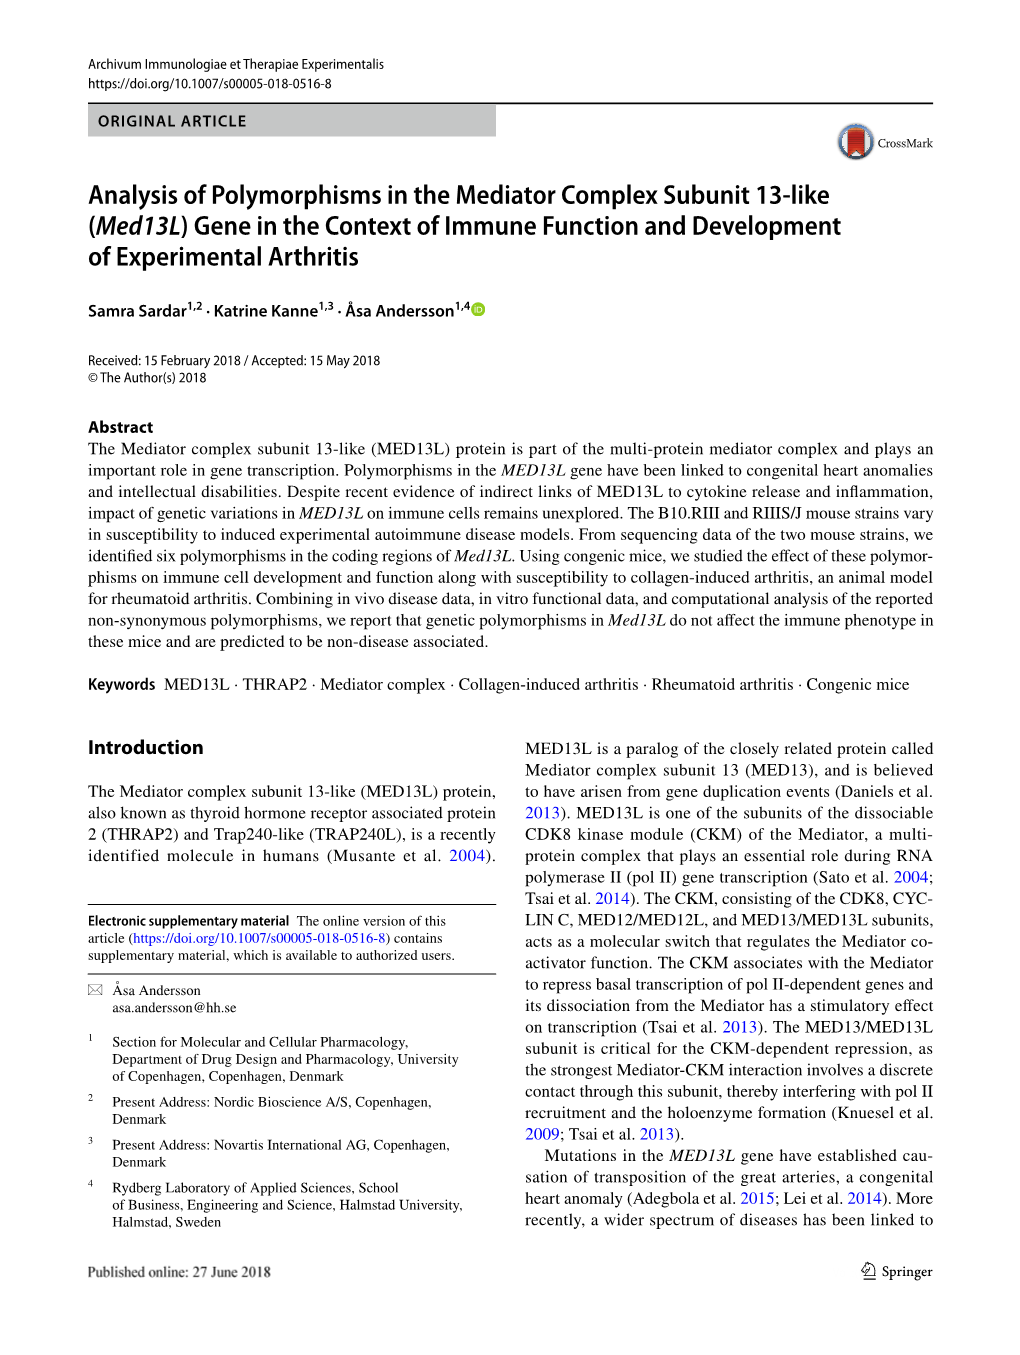 Analysis of Polymorphisms in the Mediator Complex Subunit 13-Like (Med13l) Gene in the Context of Immune Function and Development of Experimental Arthritis